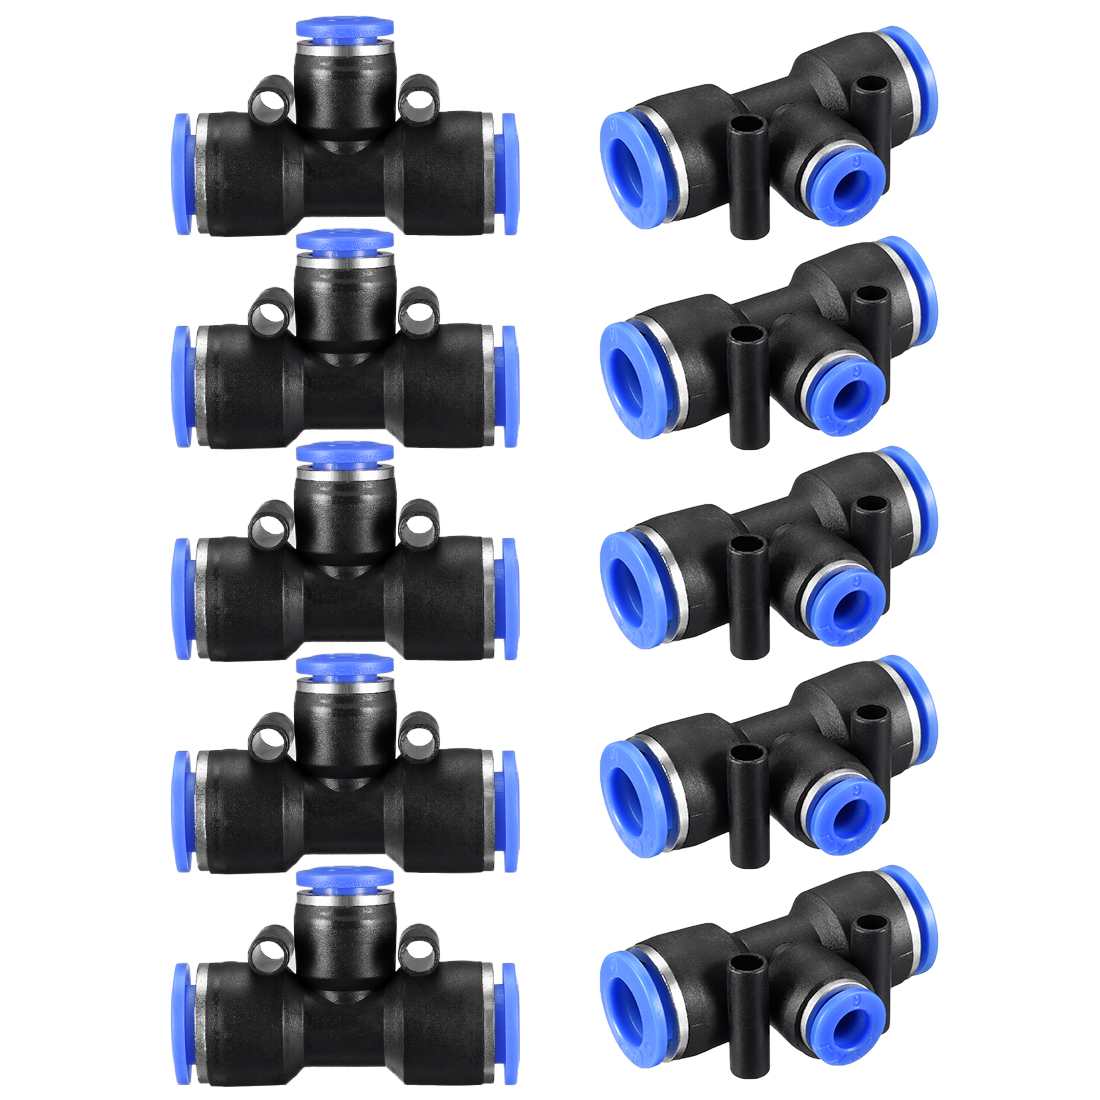 Unique Bargains 10pcs Push to Connect Fittings T Type 25/64“ -15/64” od Tube Fittings Blue